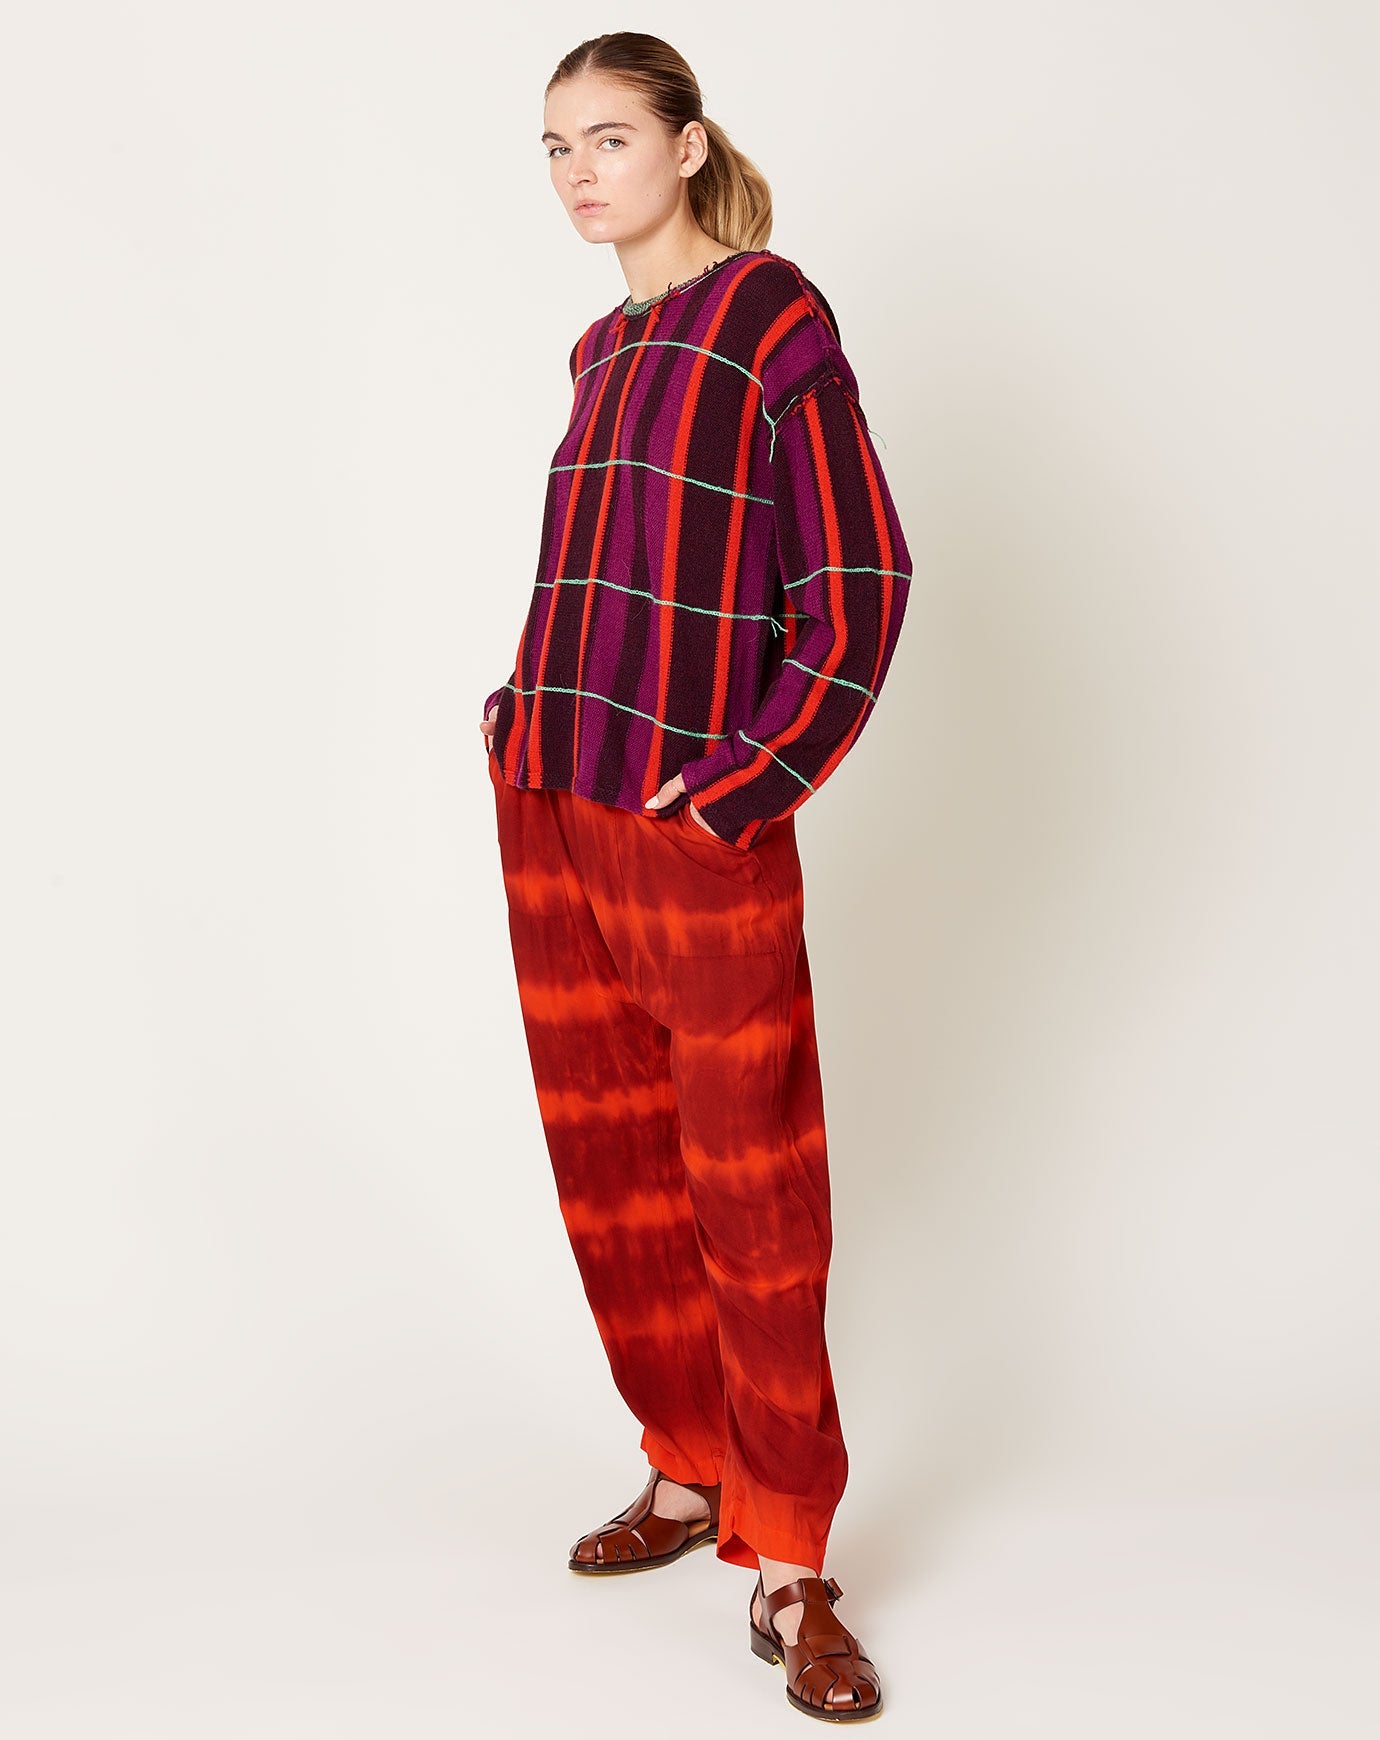 Sunday Pant in Fire and Stripes Tie Dye